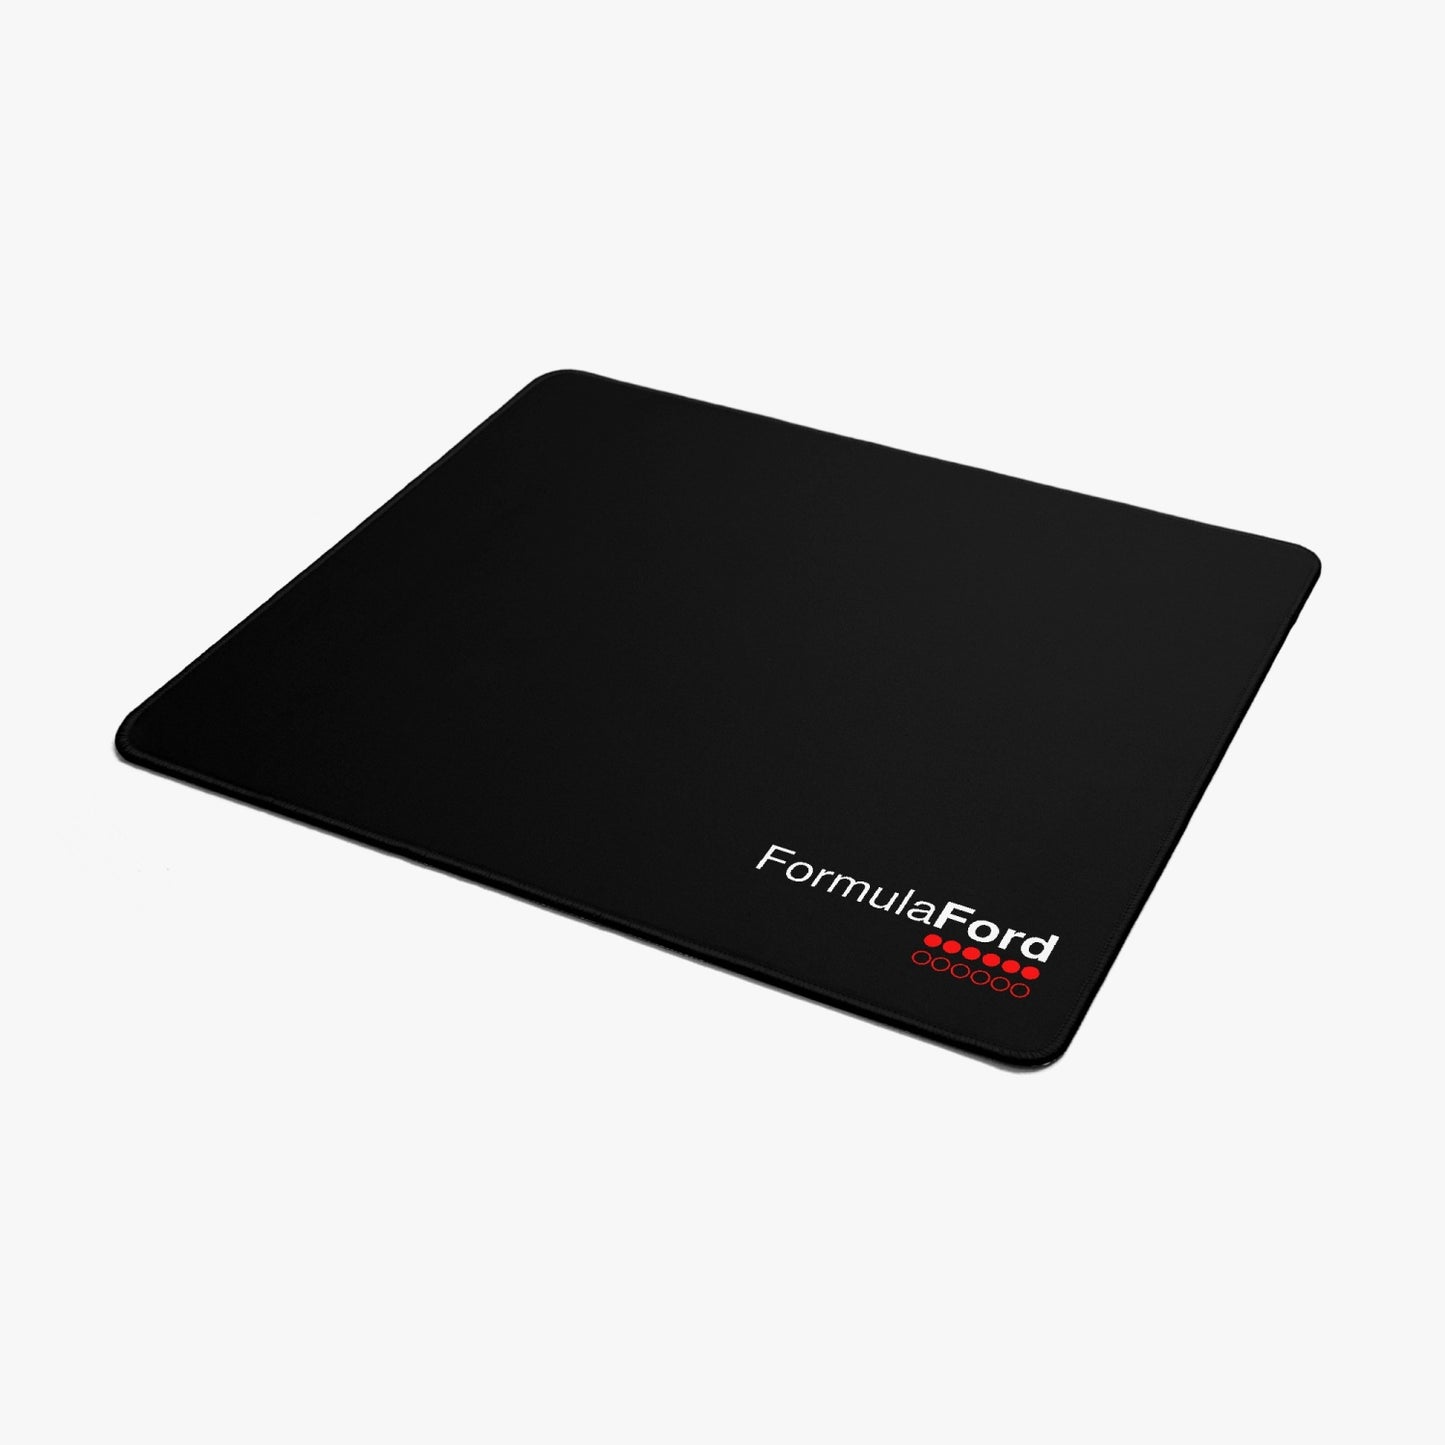 FORMULA FORD OFFICIAL Premium Gaming Mouse Pad